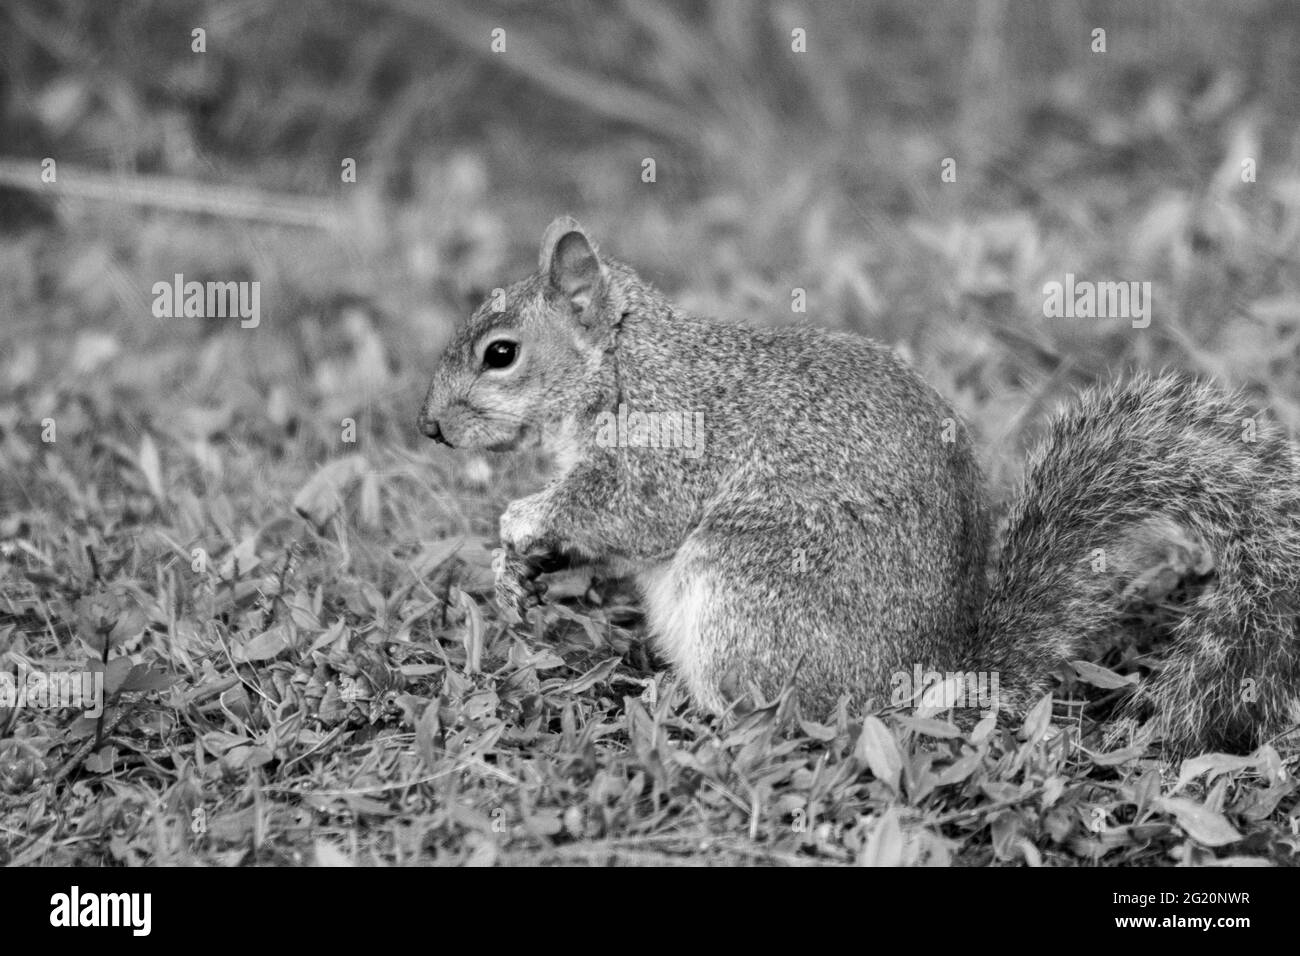 A cute young squirrel pauses while eating food Stock Photo